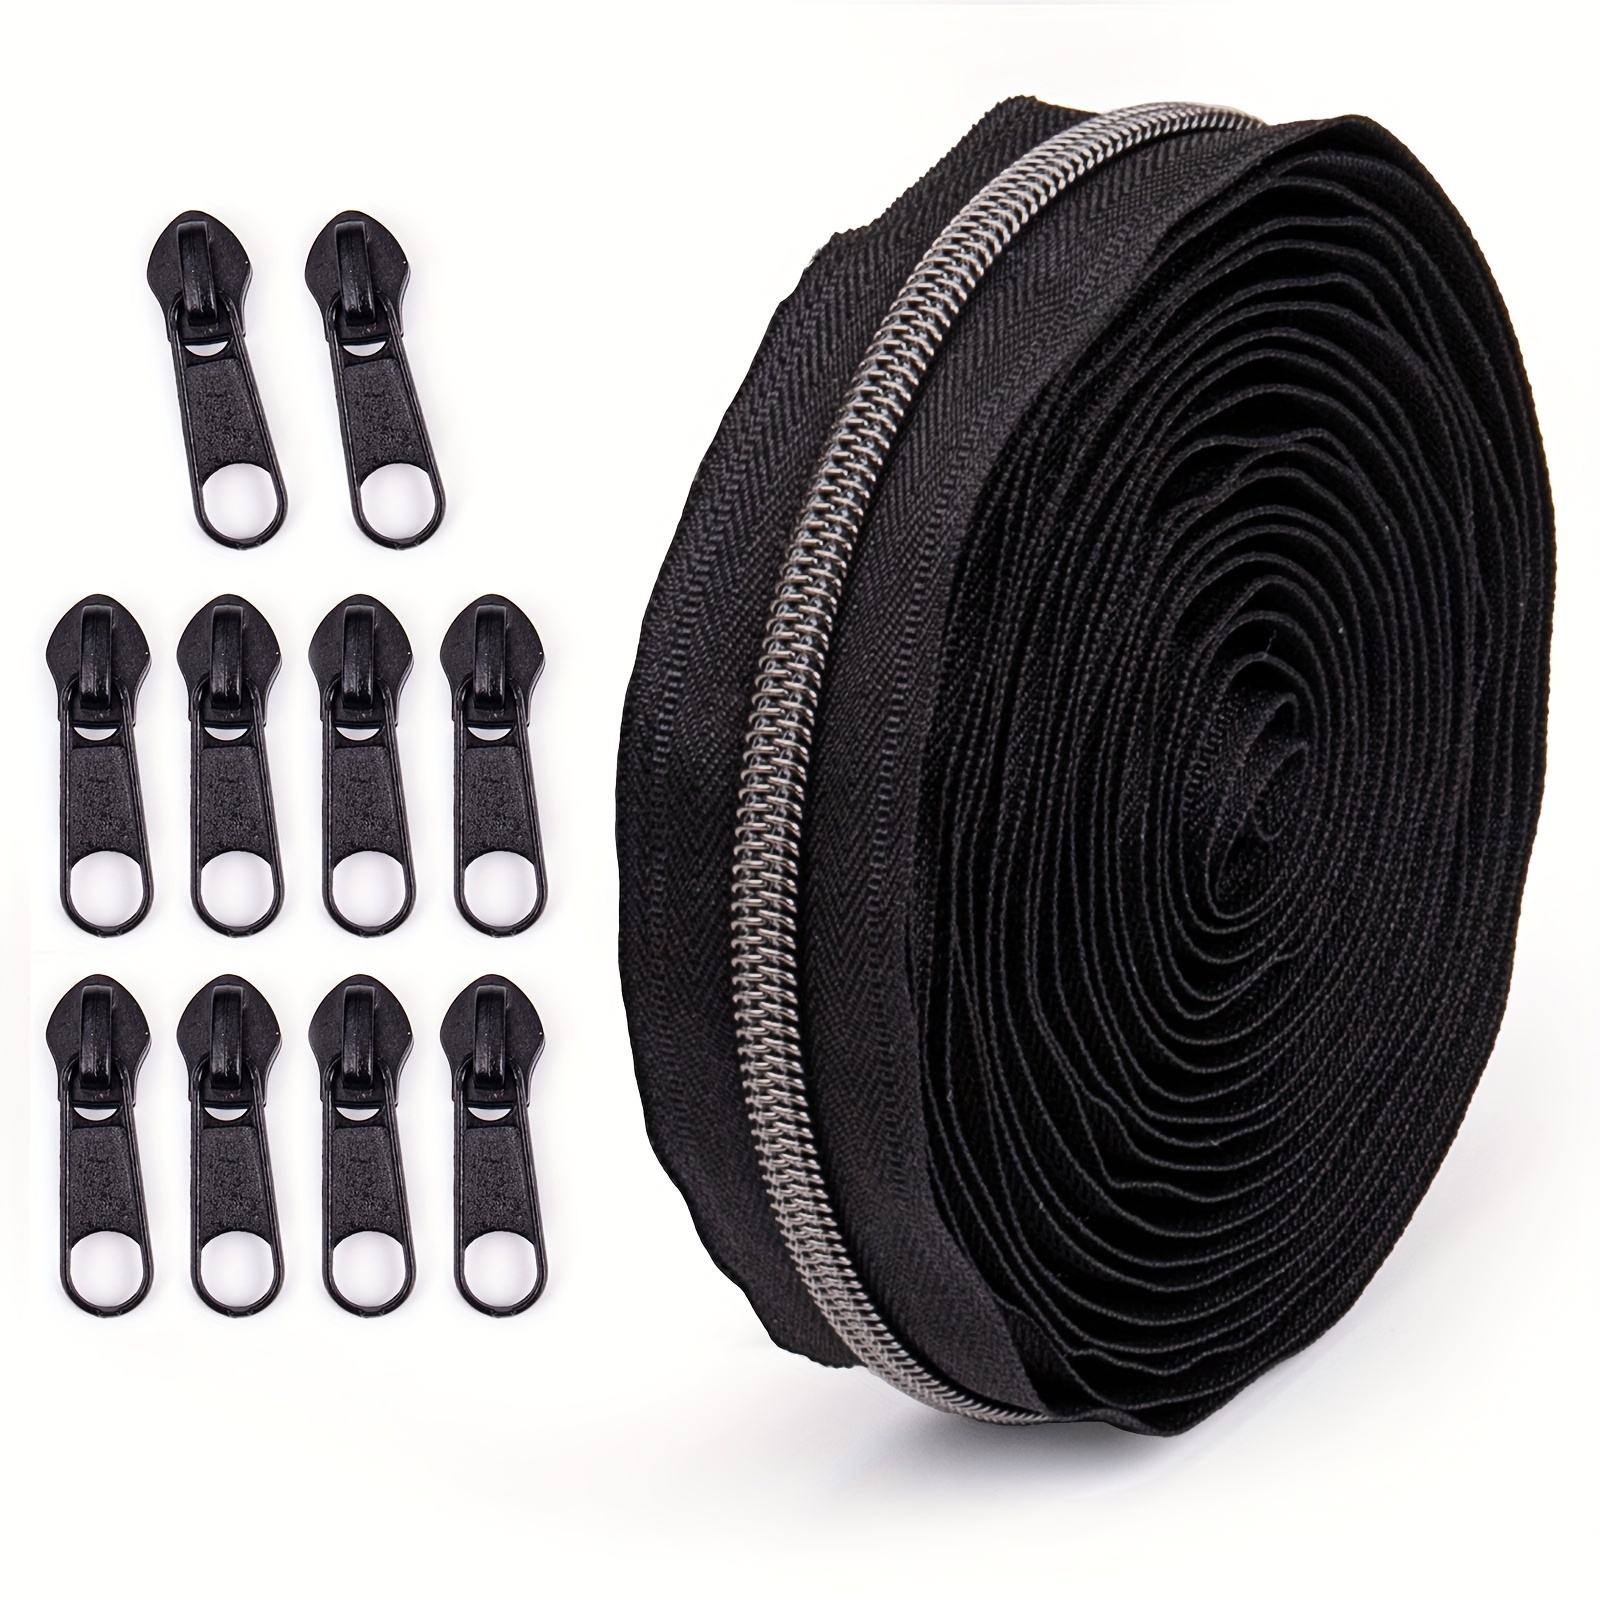 

secure" Changsons 4.5m/177" Black Nylon Zipper Tape With 10 Metal Slider Pulls, No. 5 Gunmetal Teeth - Ideal For Clothing & Luggage